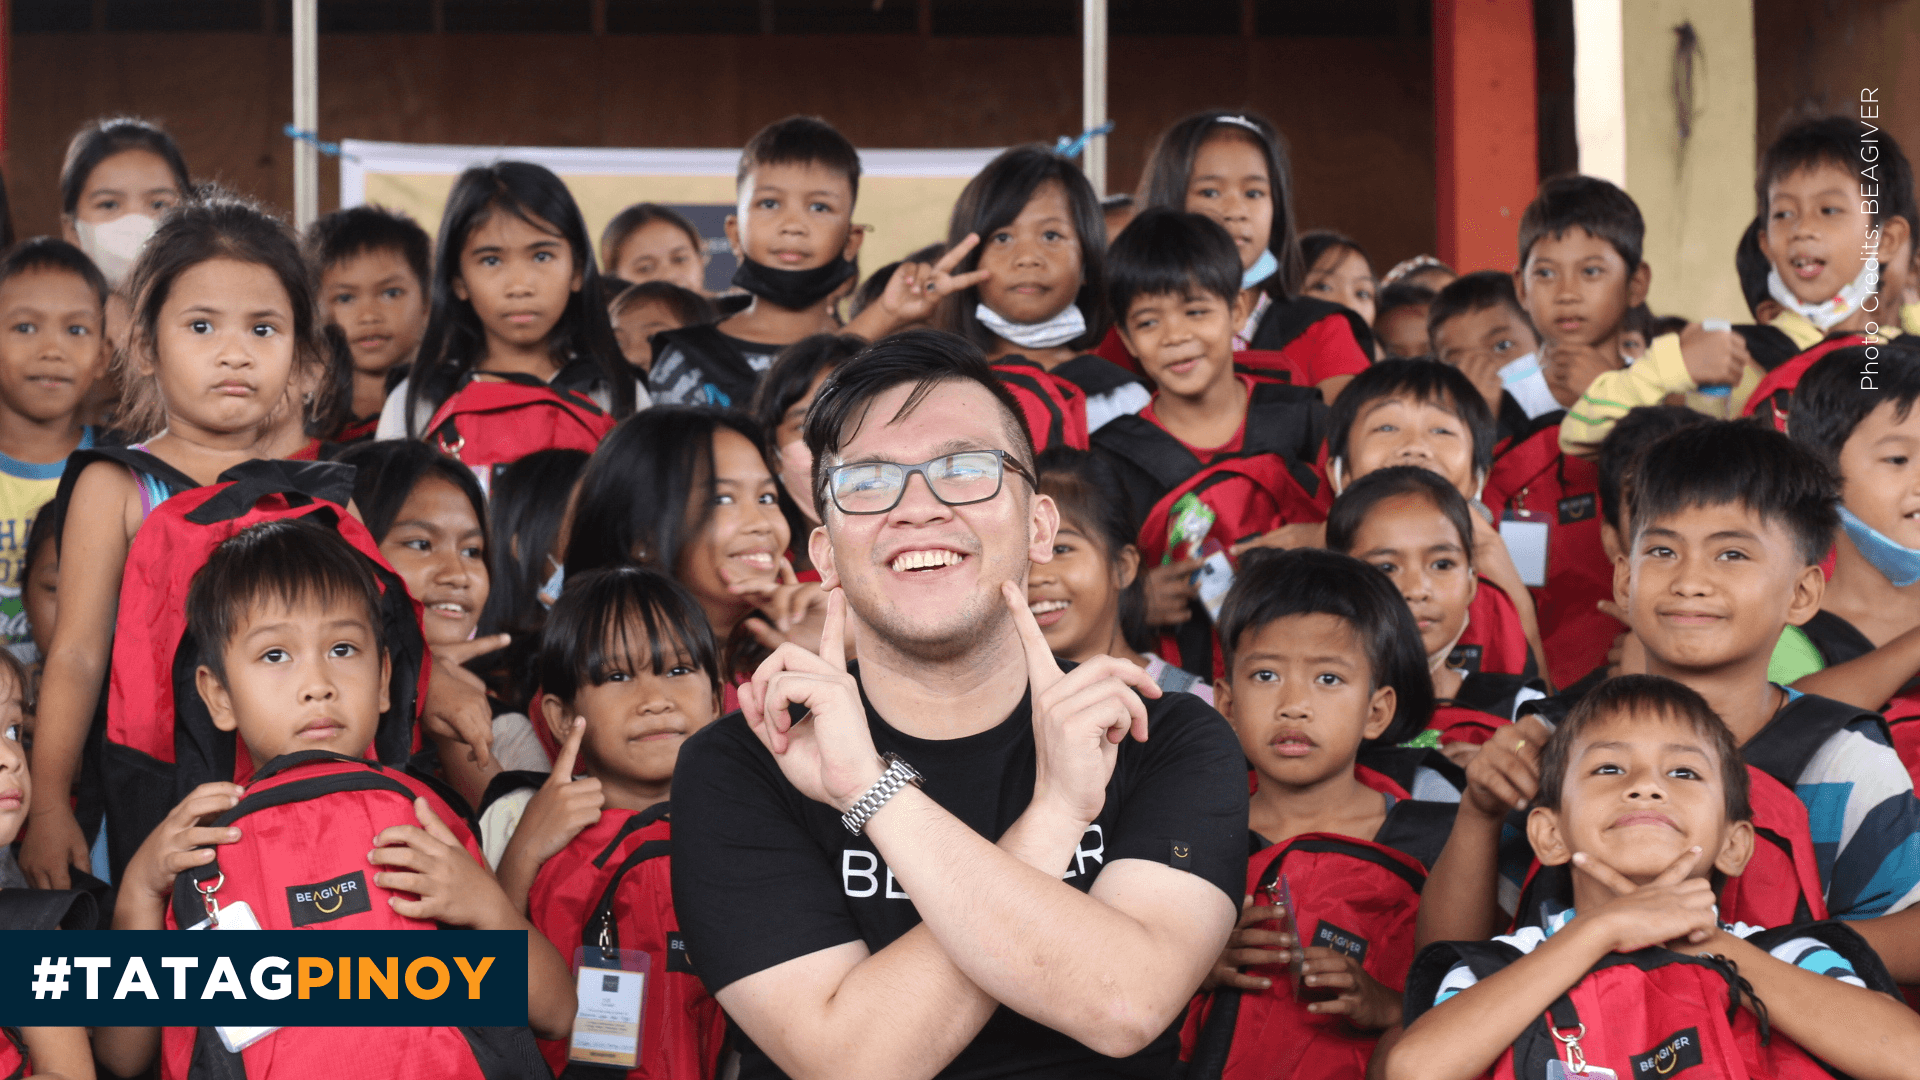 [#TatagPinoy] Charity is a Moral Duty